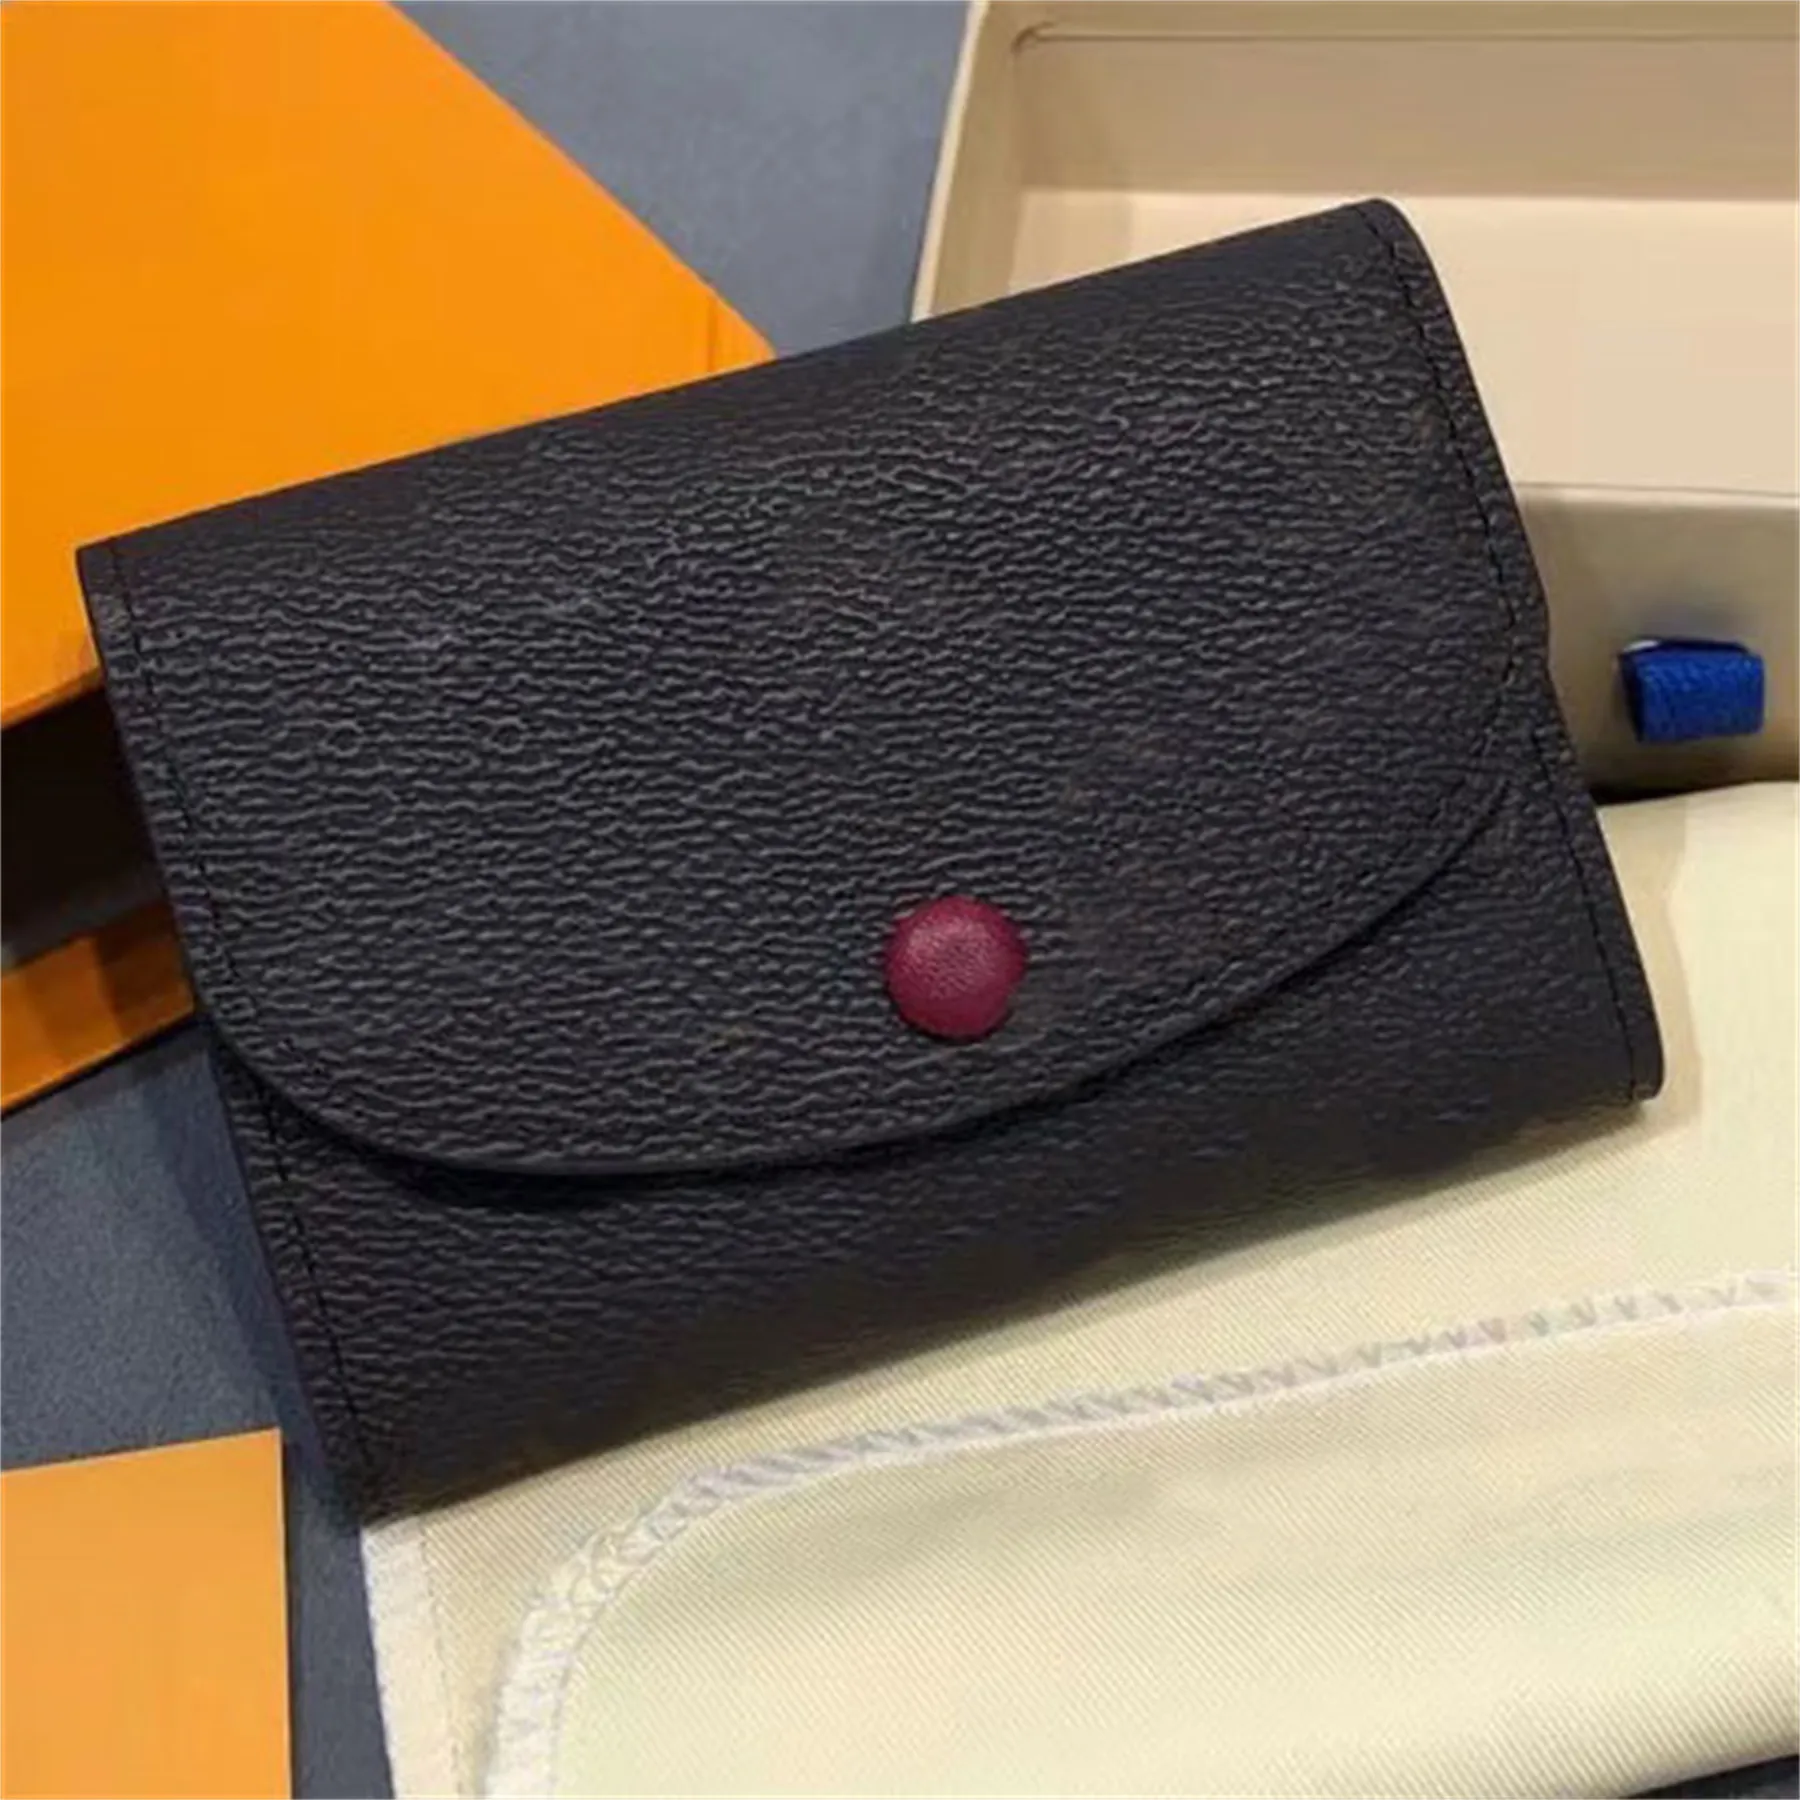 Designer Rosalie Coin Purse Fashion Womens Compact Short Wallet Luxury Leather Key Pouch Credit Card Holder Classic Brown P5cs #